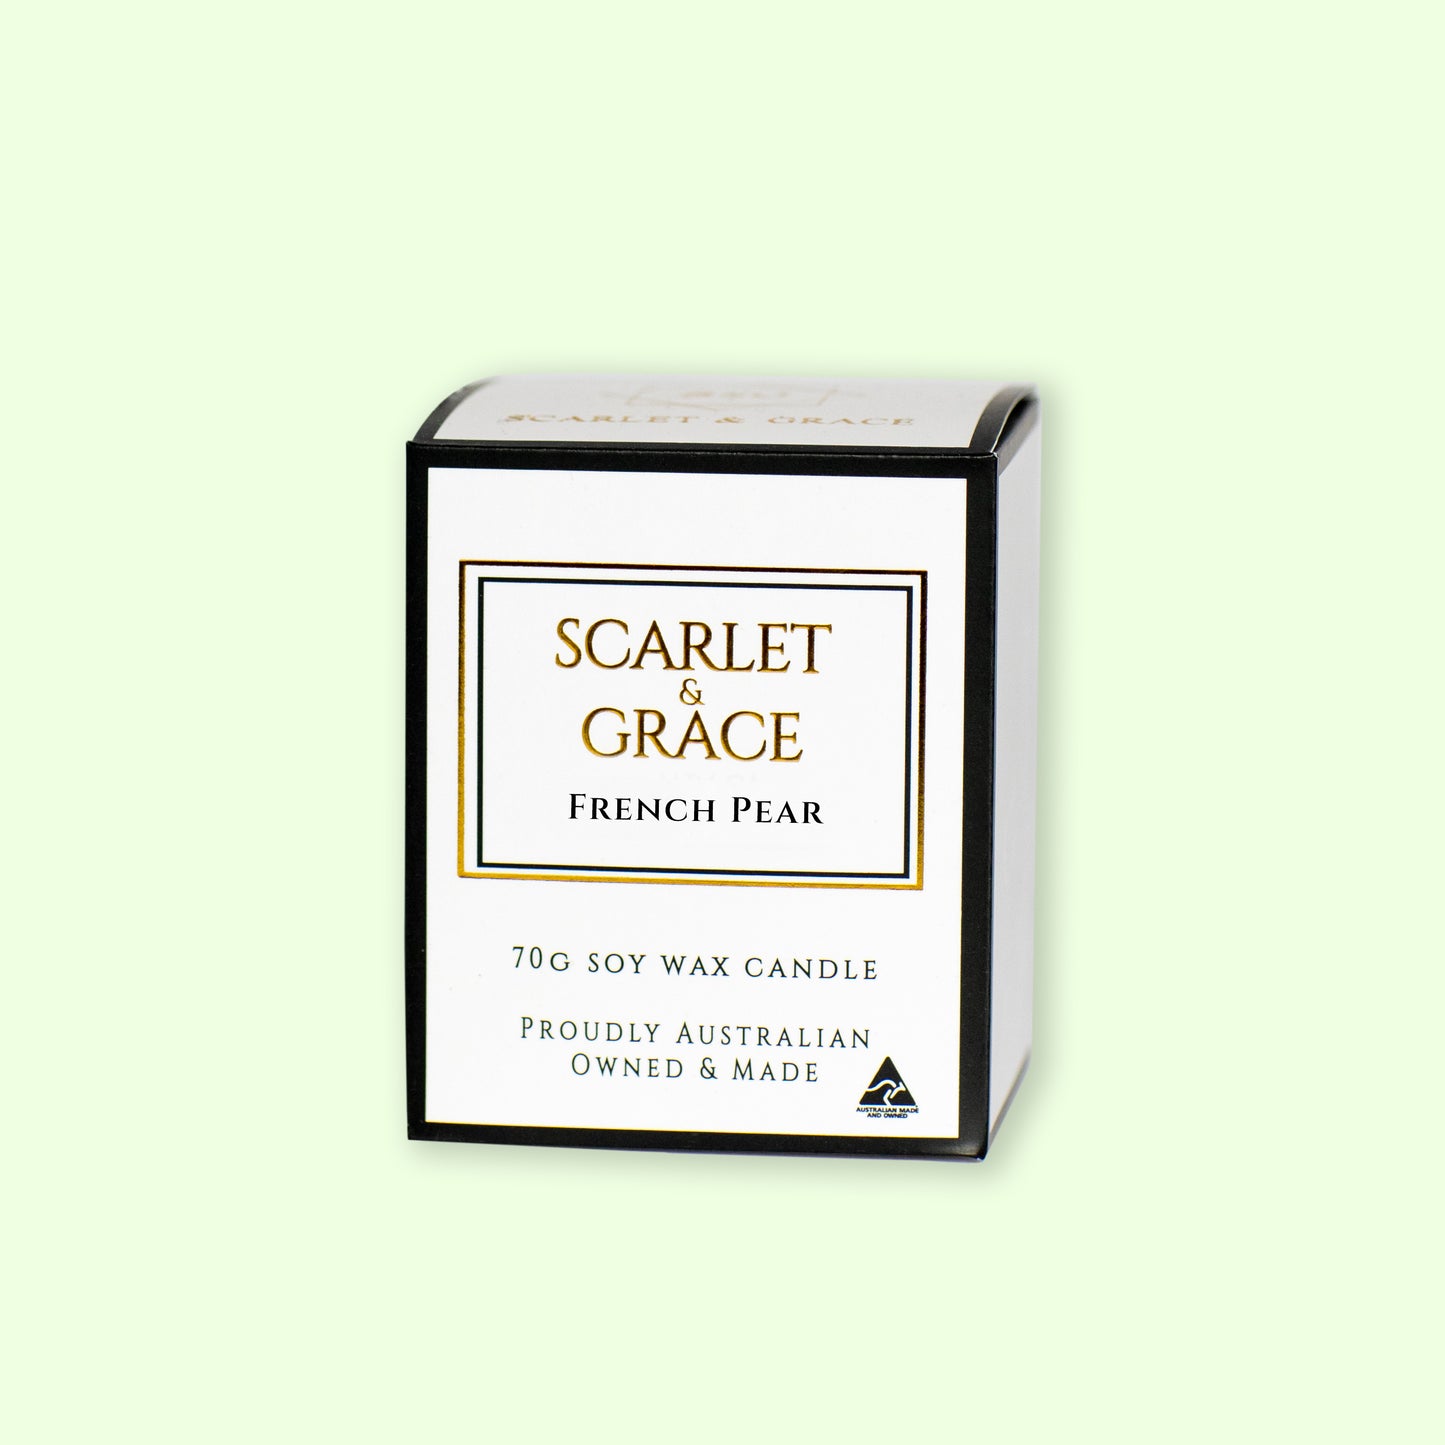 French Pear - 70gm Soy Wax Candle - Scarlet & Grace